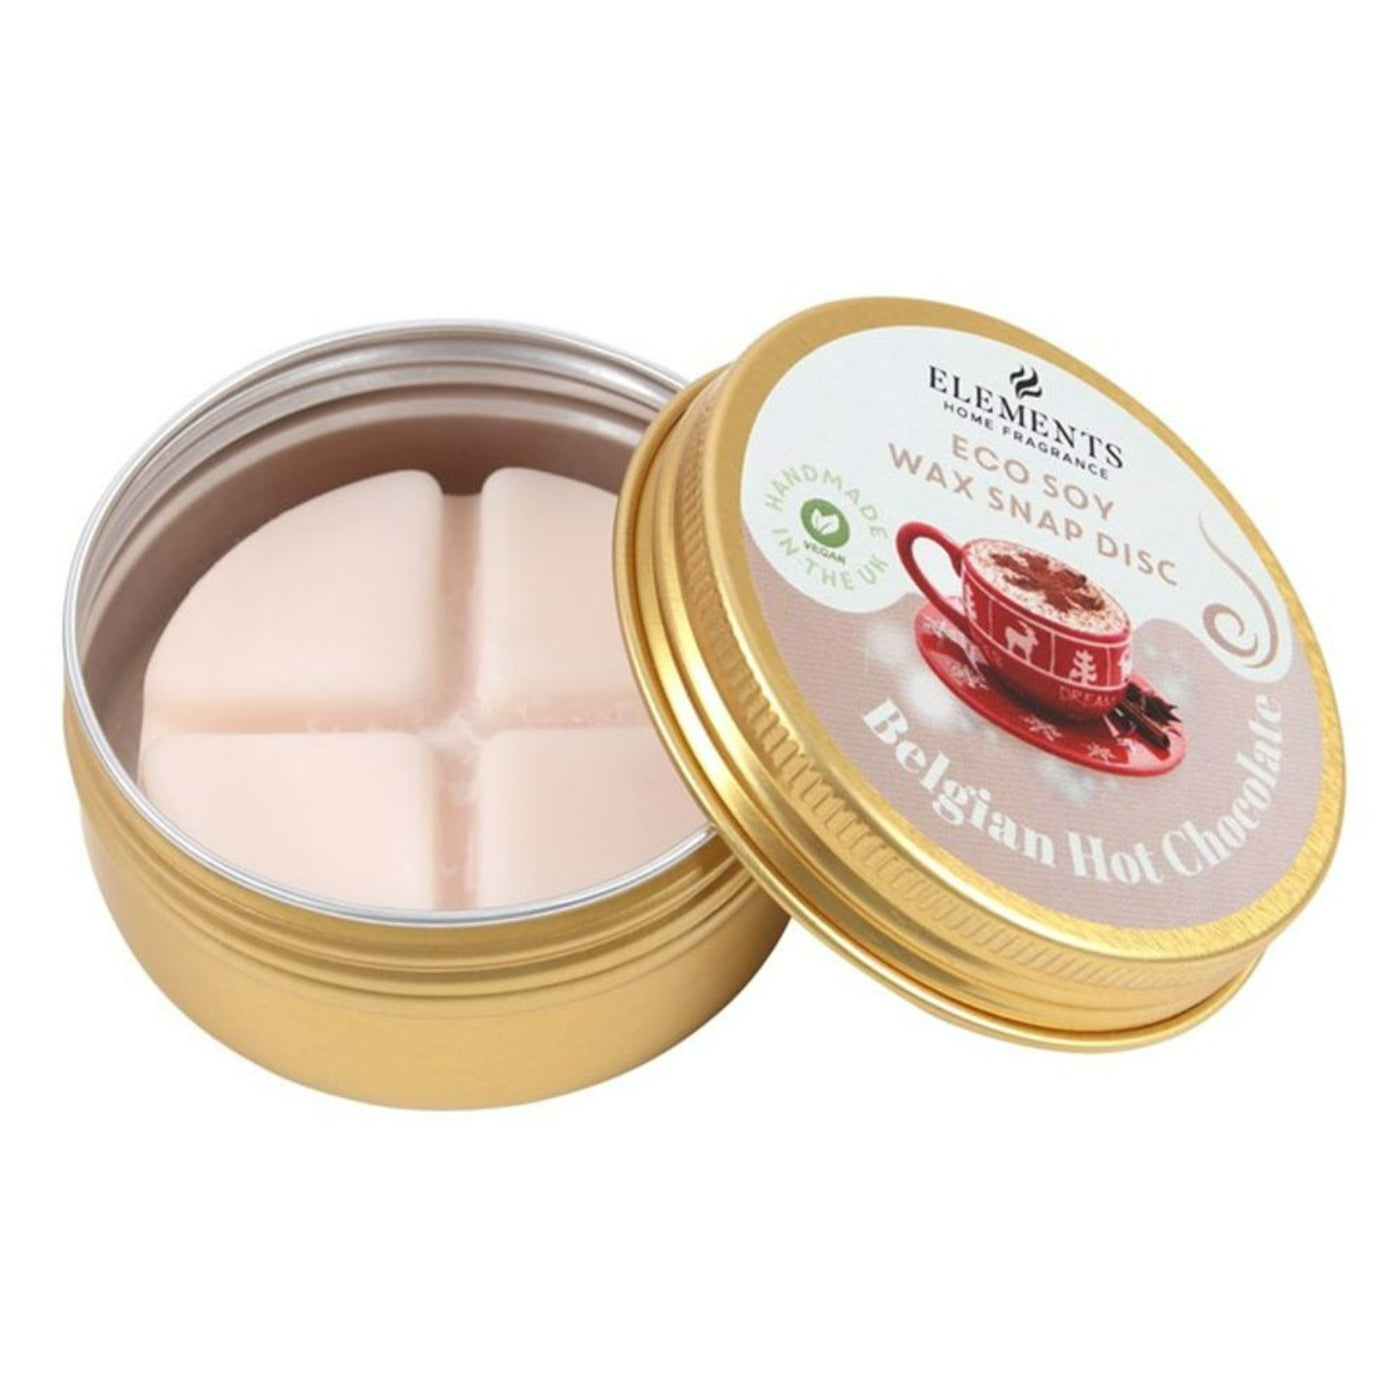 Belgian Hot Chocolate Eco Soy Wax Snap Disc In the Tin.